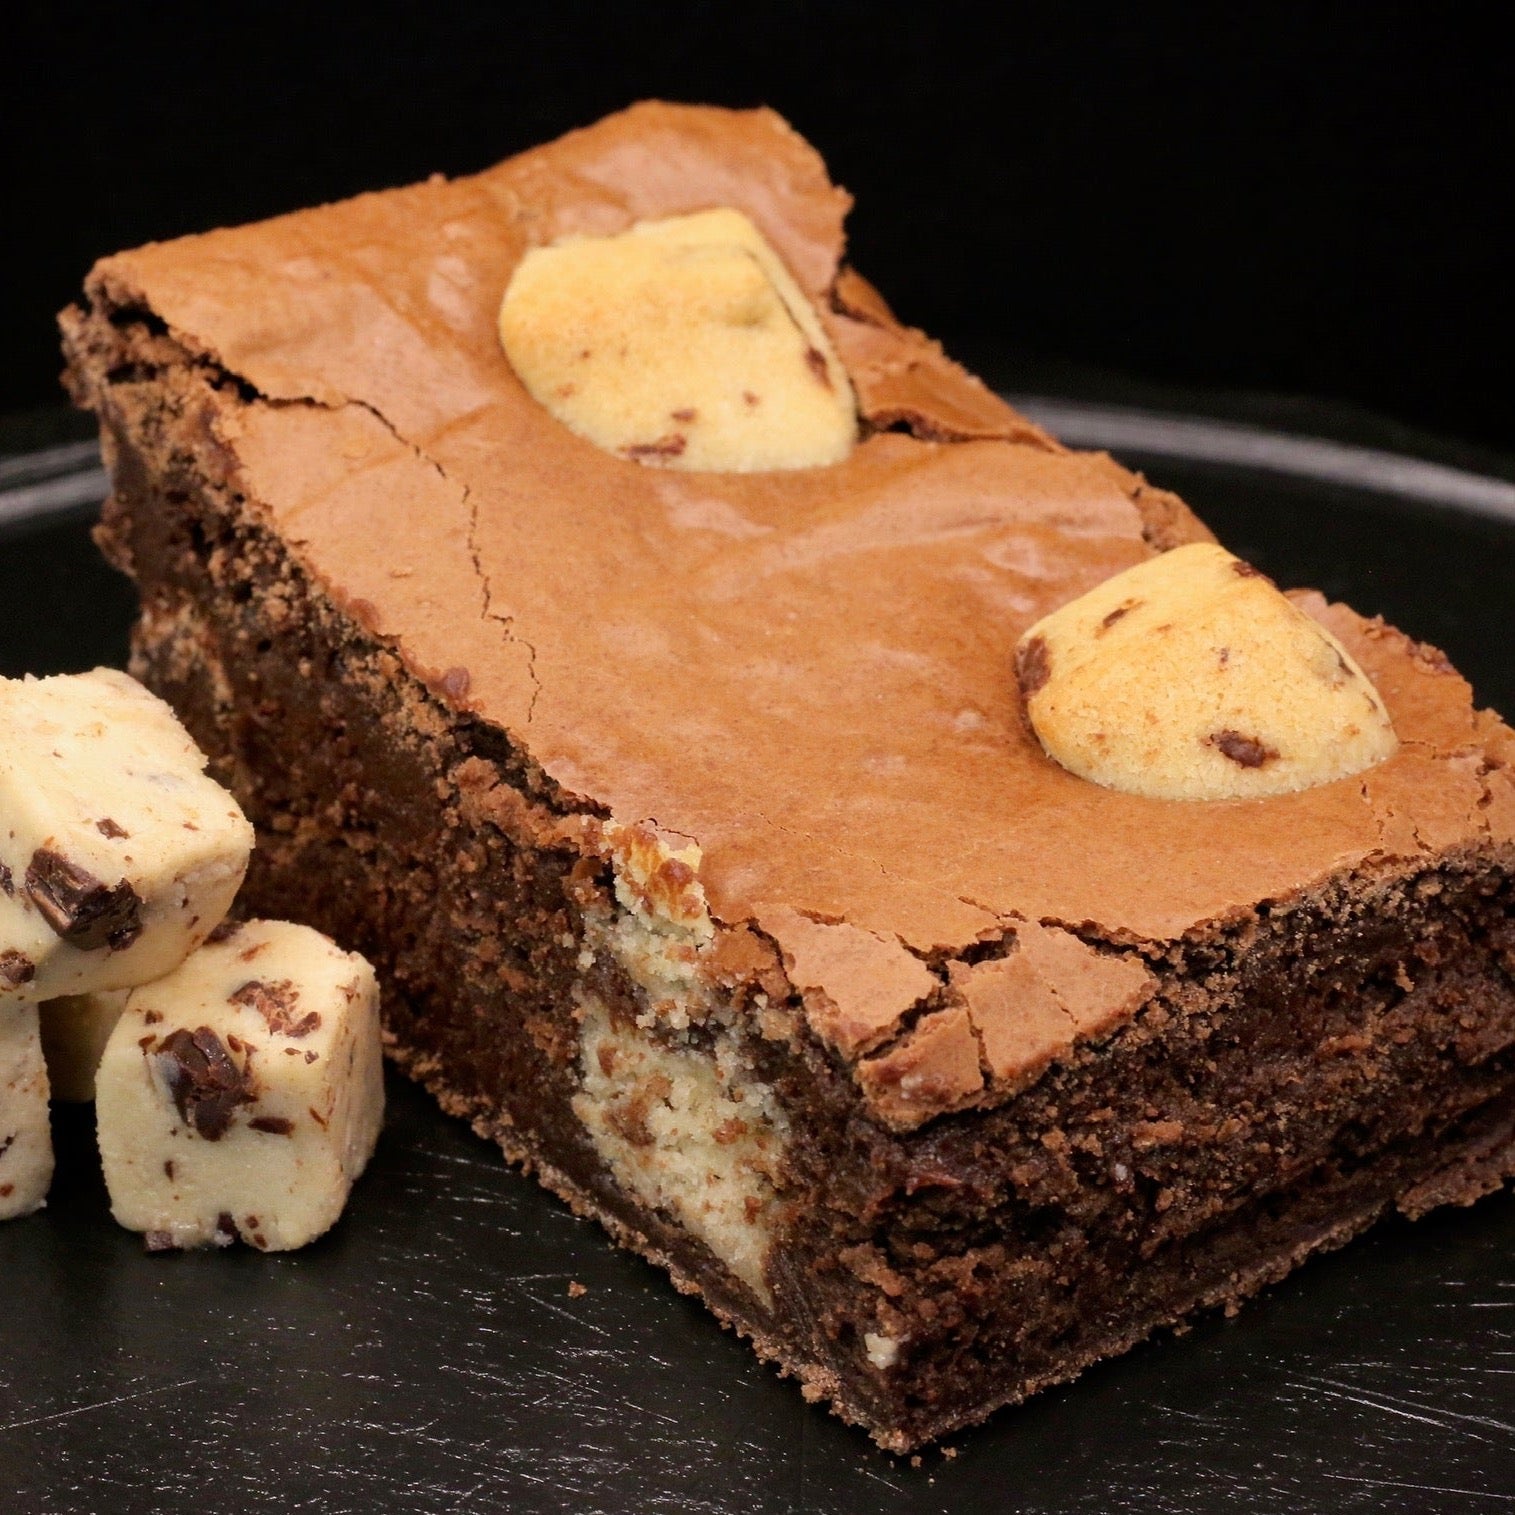 Cookie Dough - Awesome brownies